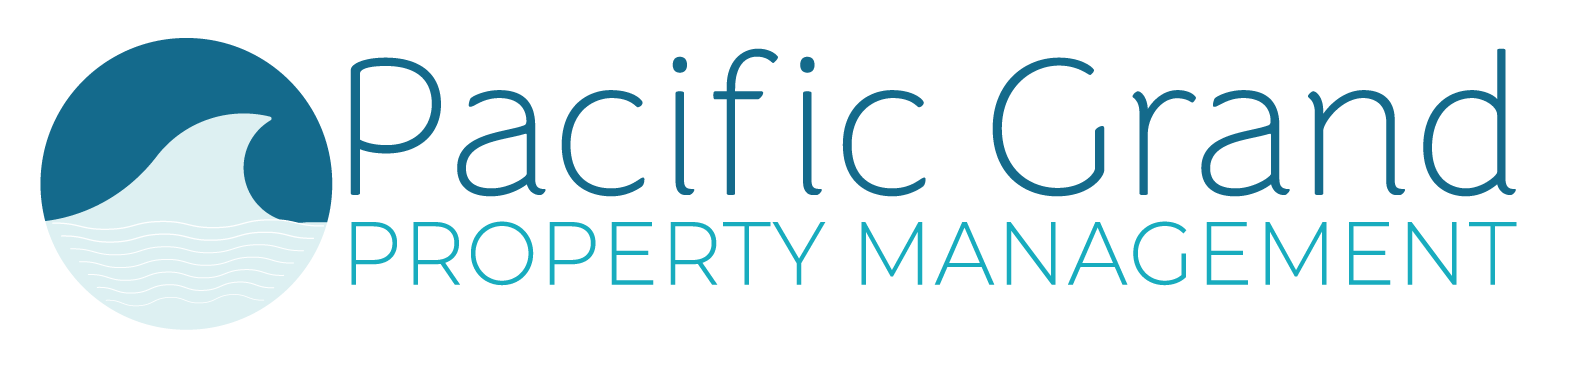 Pacific Grand Property Management logo